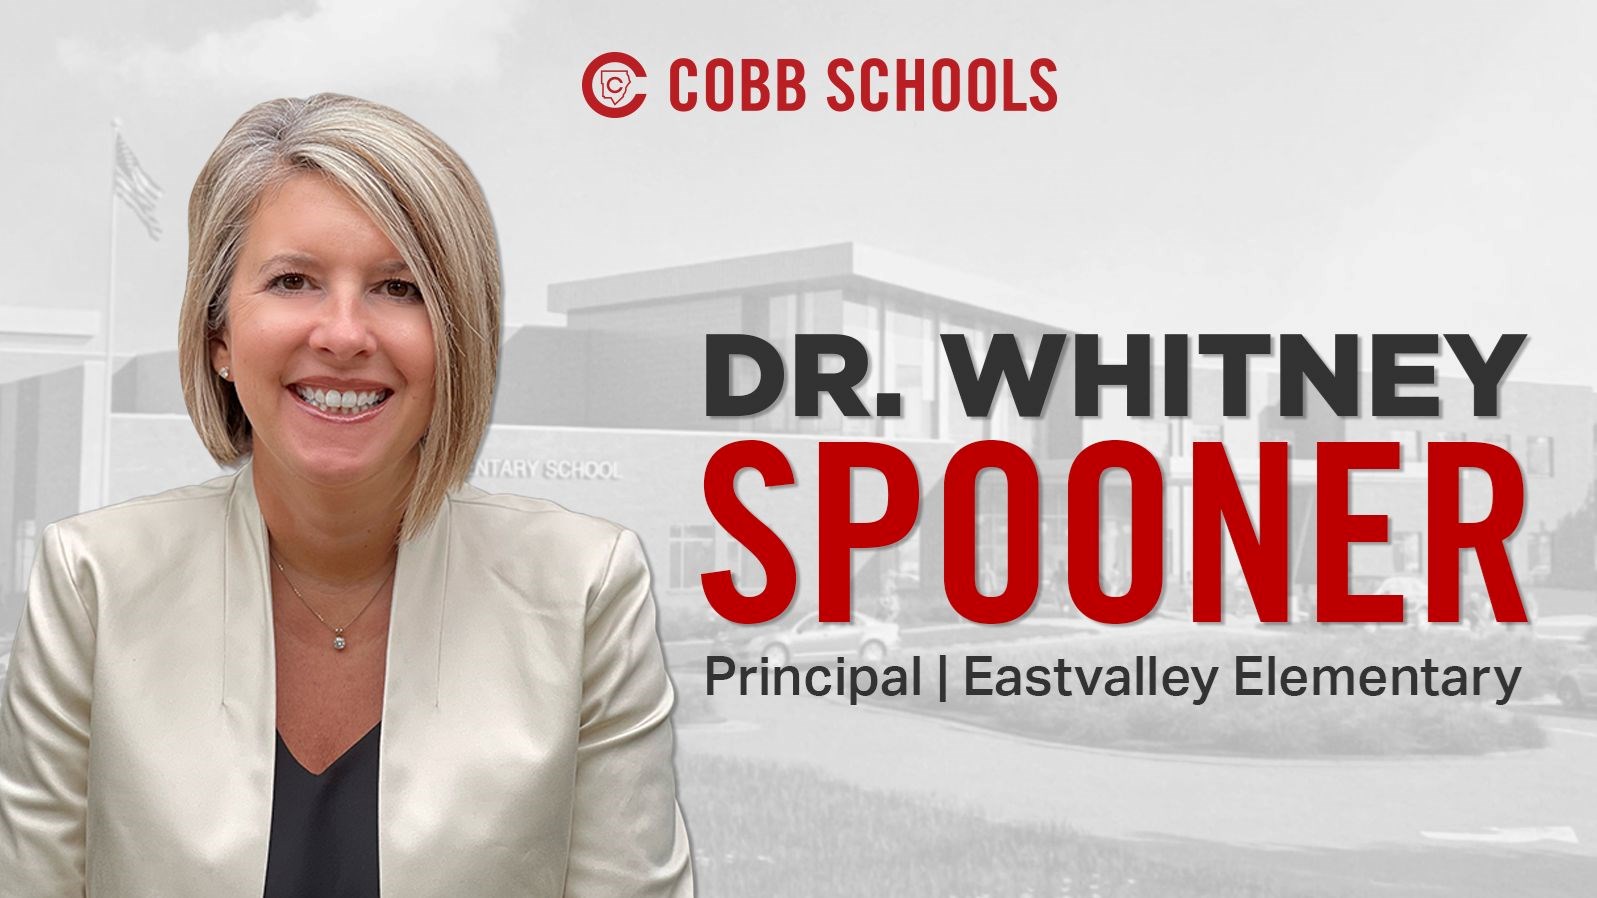 Dr. Whitney Spooner to serve as principal at Eastvalley Elementary